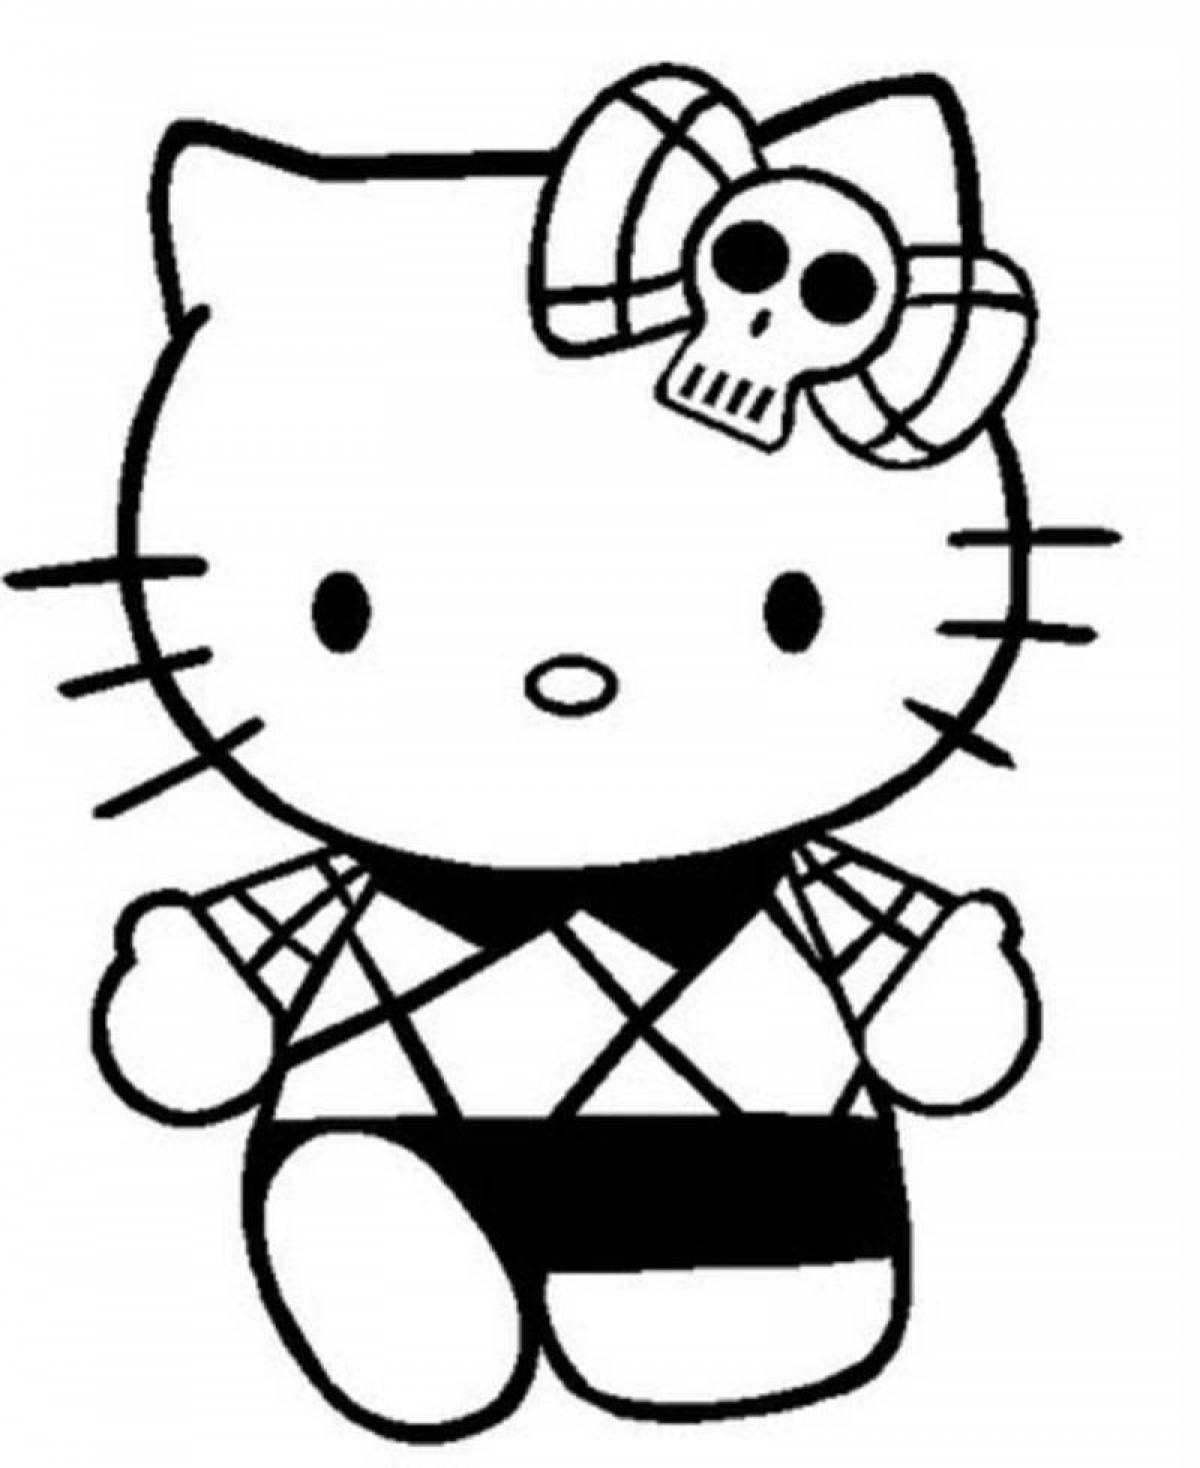 Sparkly hello kitty and kuromi coloring book